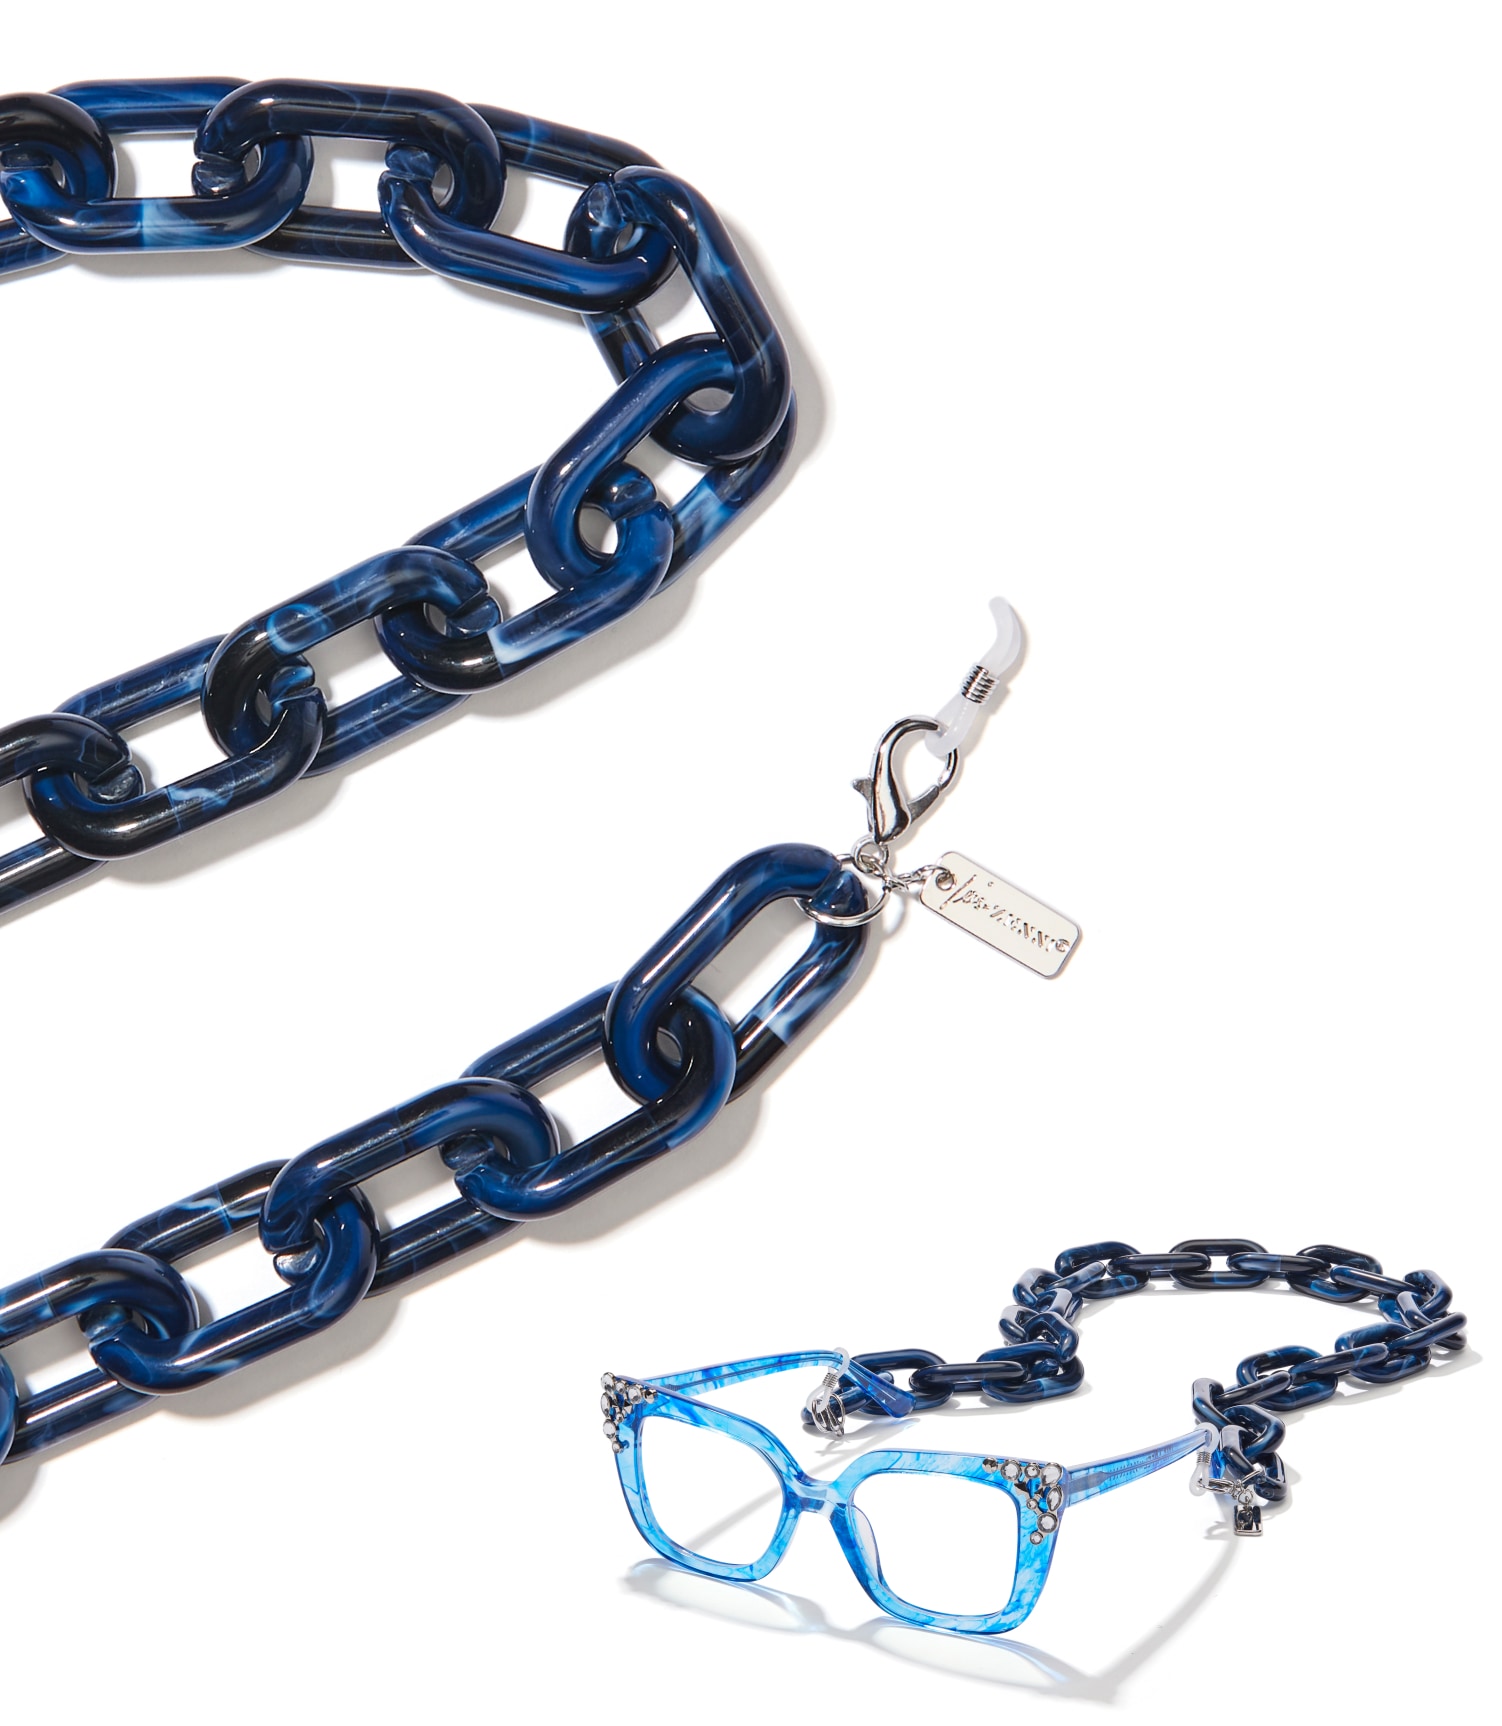 Image of a close-up shot of the Iris Apfel x Zenni Unbroken chain, with clasp closures, logo charm, and chunky links. Below the image is a pair of Iris Apfel x Zenni glasses with the unbroken chain attached. 